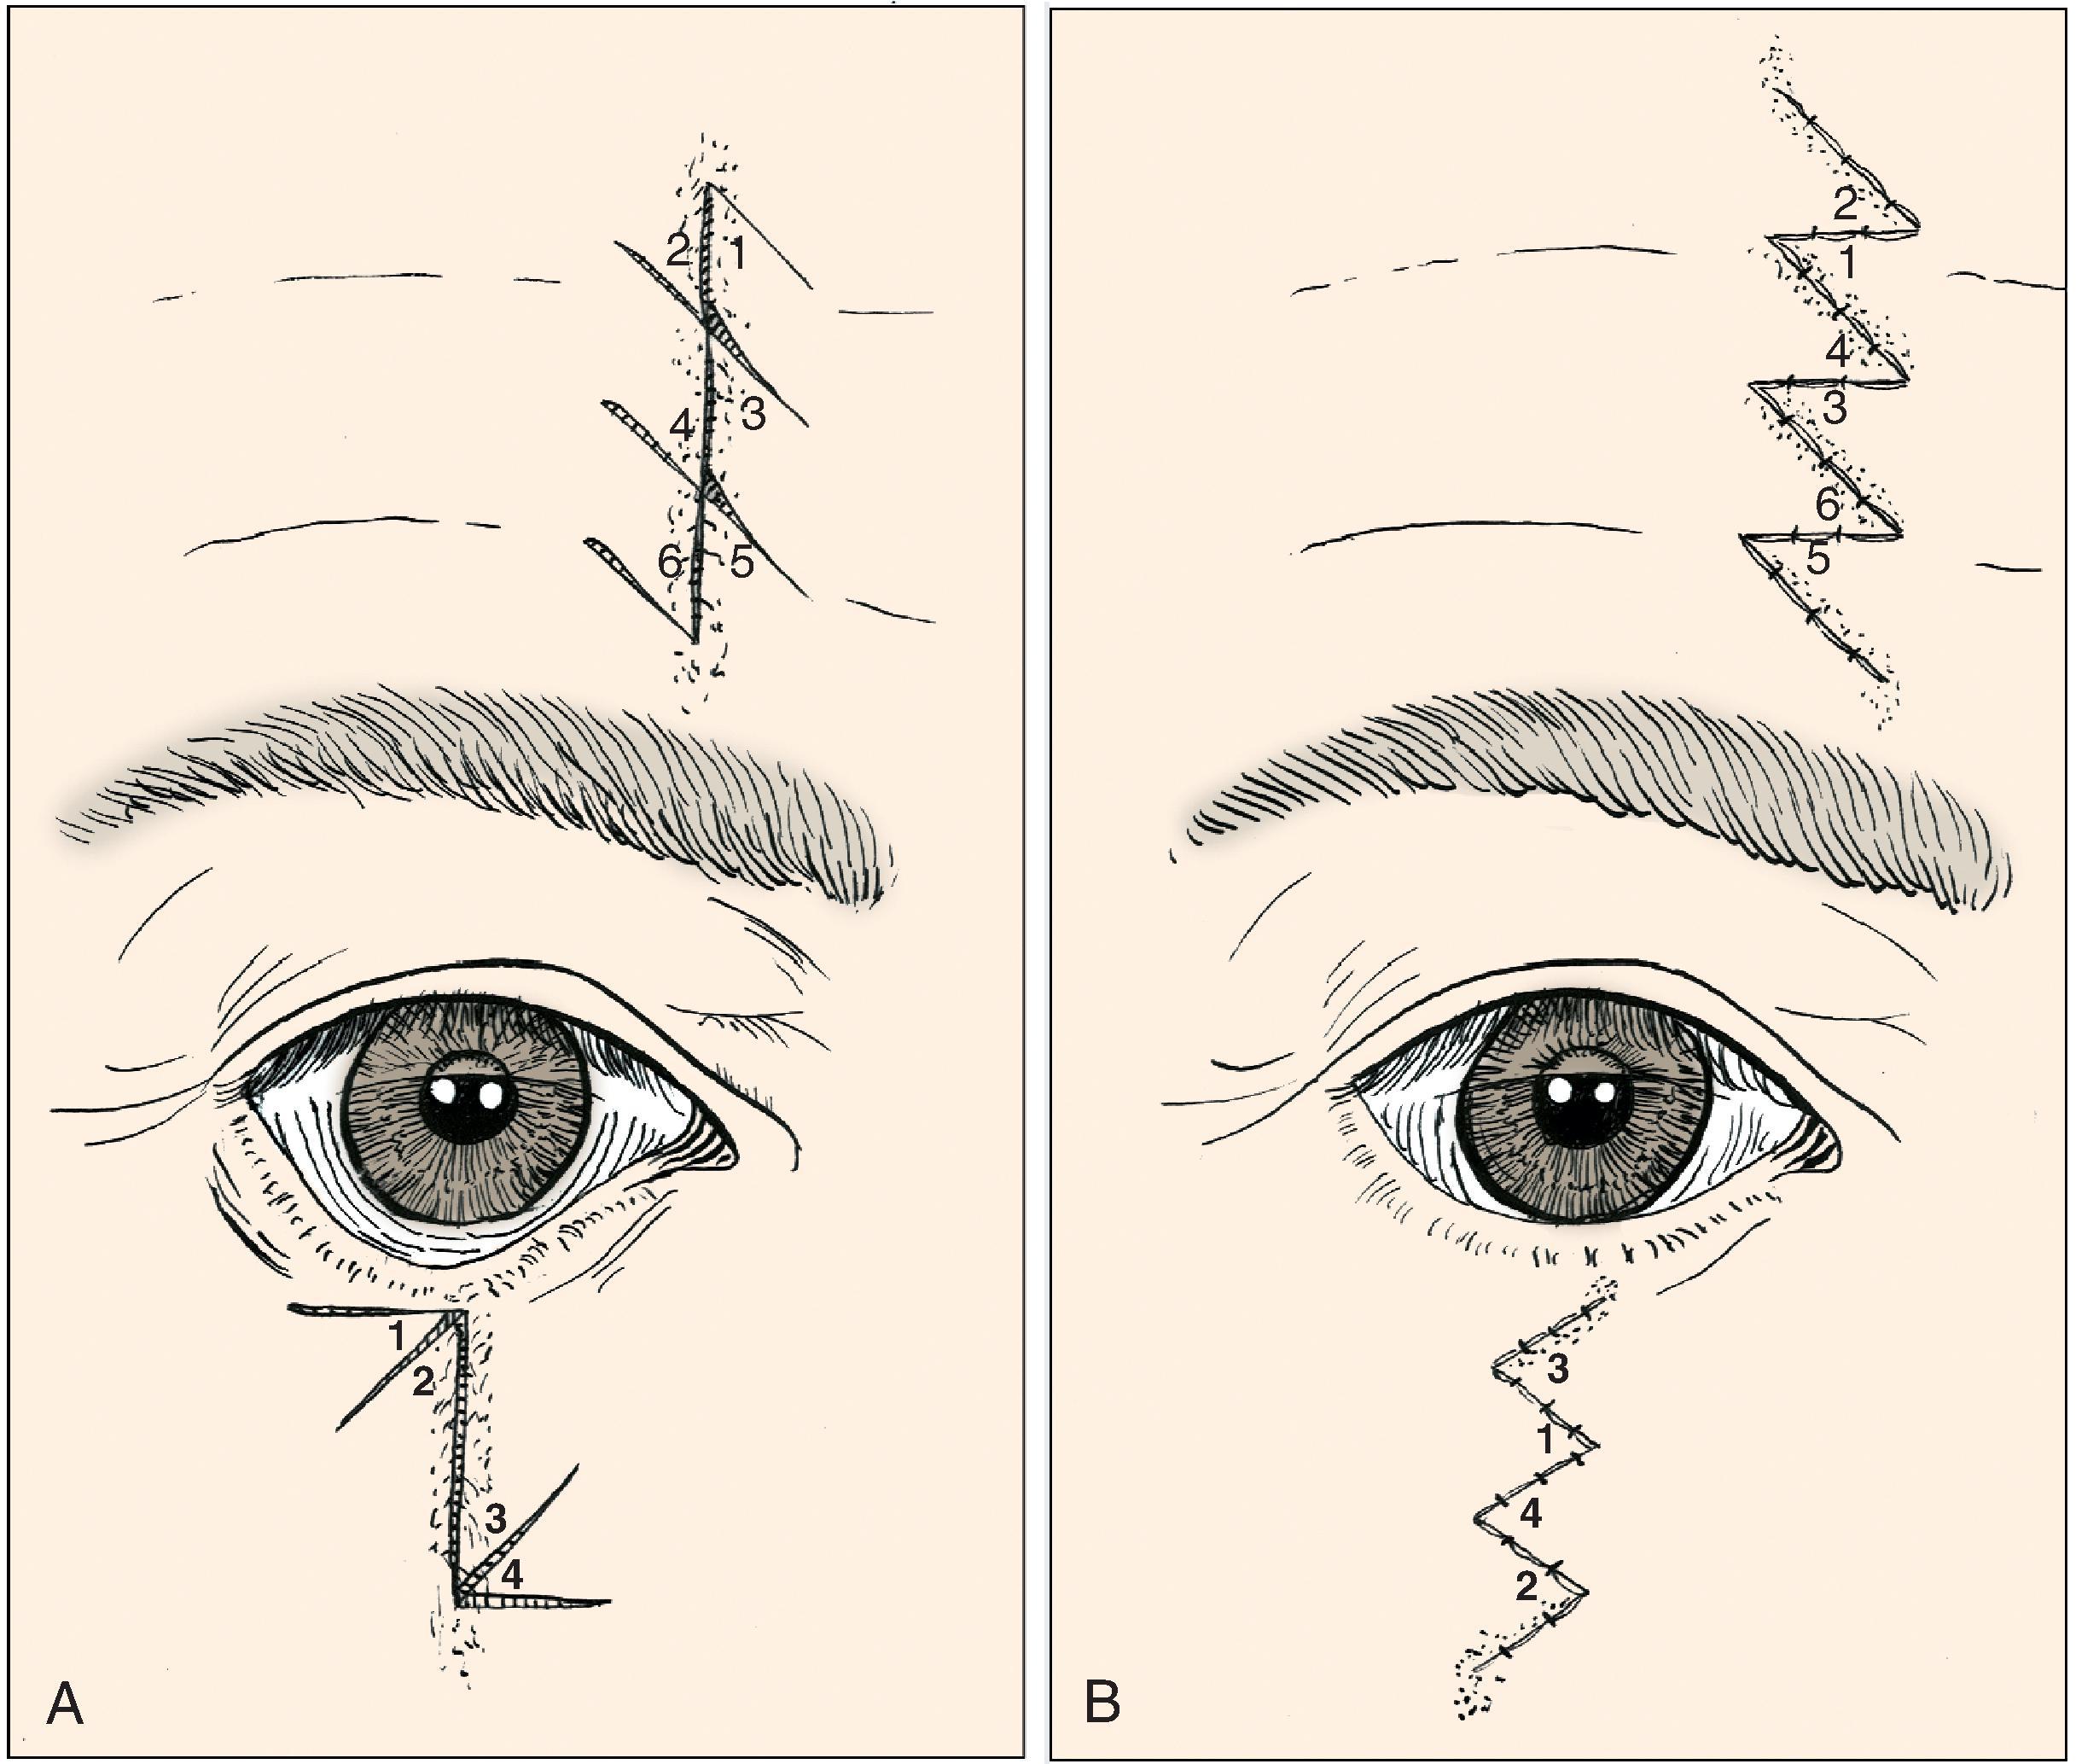 FIG. 14.15, Multiple Z-plasties used to improve camouflage of vertical forehead scar and to correct contracted lower eyelid and cheek scar.